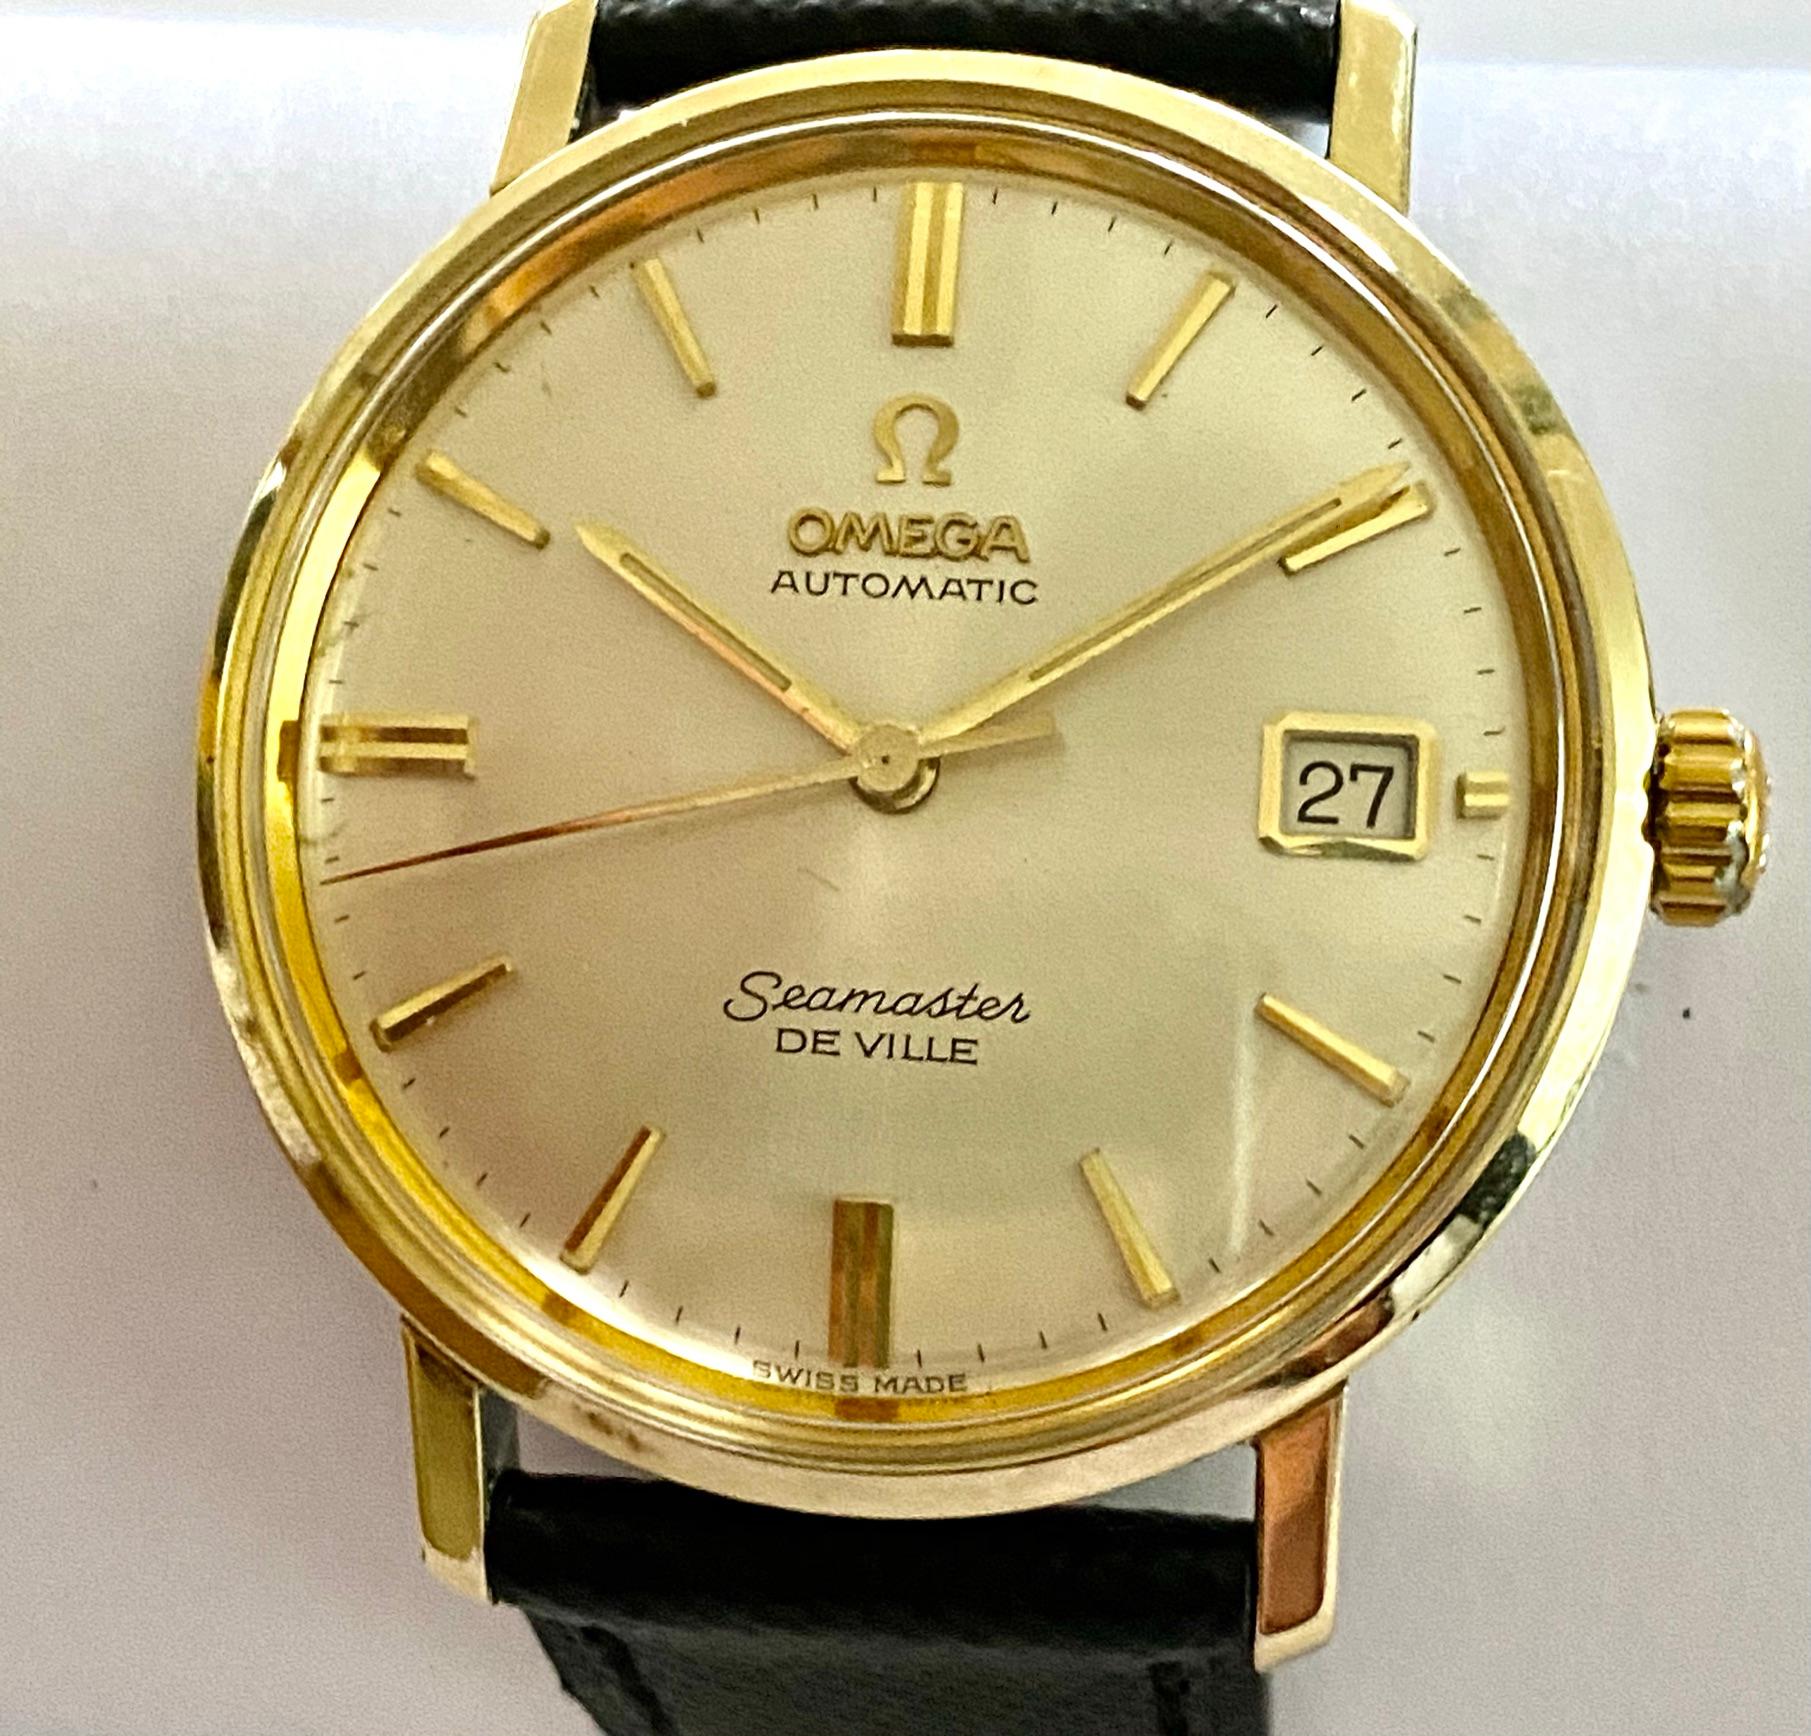 One (1) Omega Automatic Seamaster De Ville  1964,   model number: CD 166.020 
Caliber: 562 Omega  with date.  diameter: 34 mm   High: 10 mm, lengths of strap:   110 mm & 70 mm
Silvered Dial, Polished and riveted gold hour markers, Gold baton hands